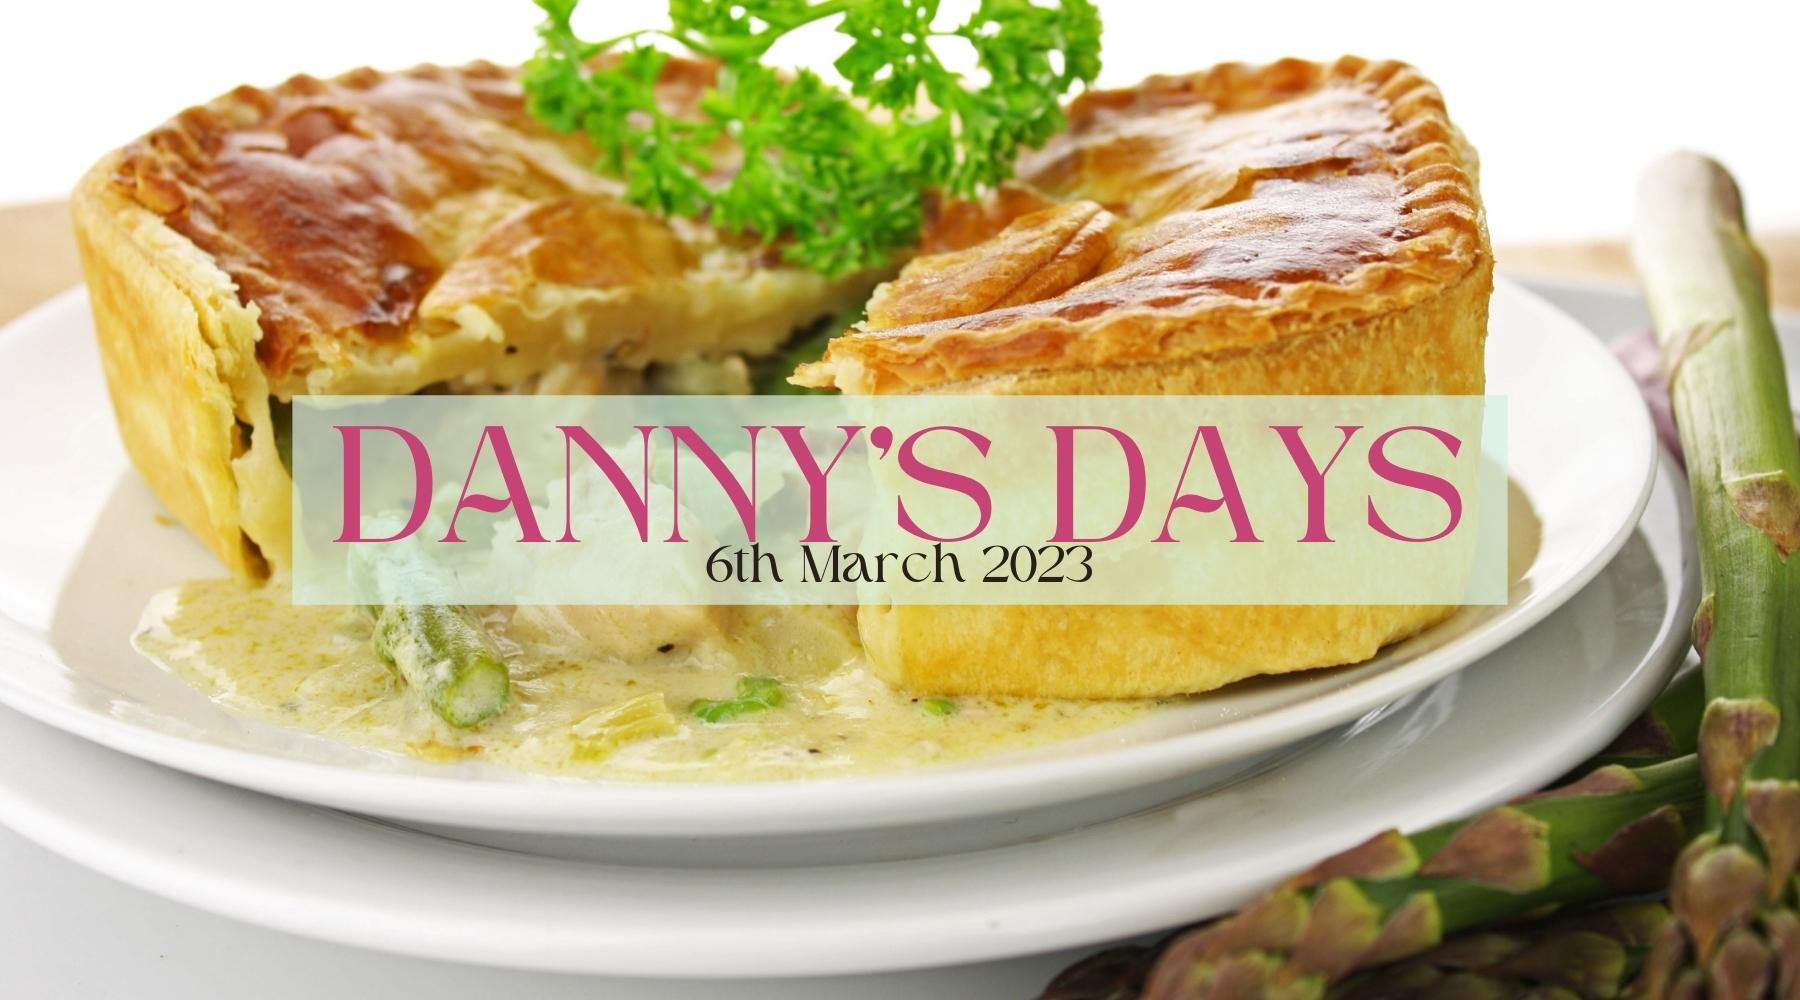 Danny's Days - 6th March 2023